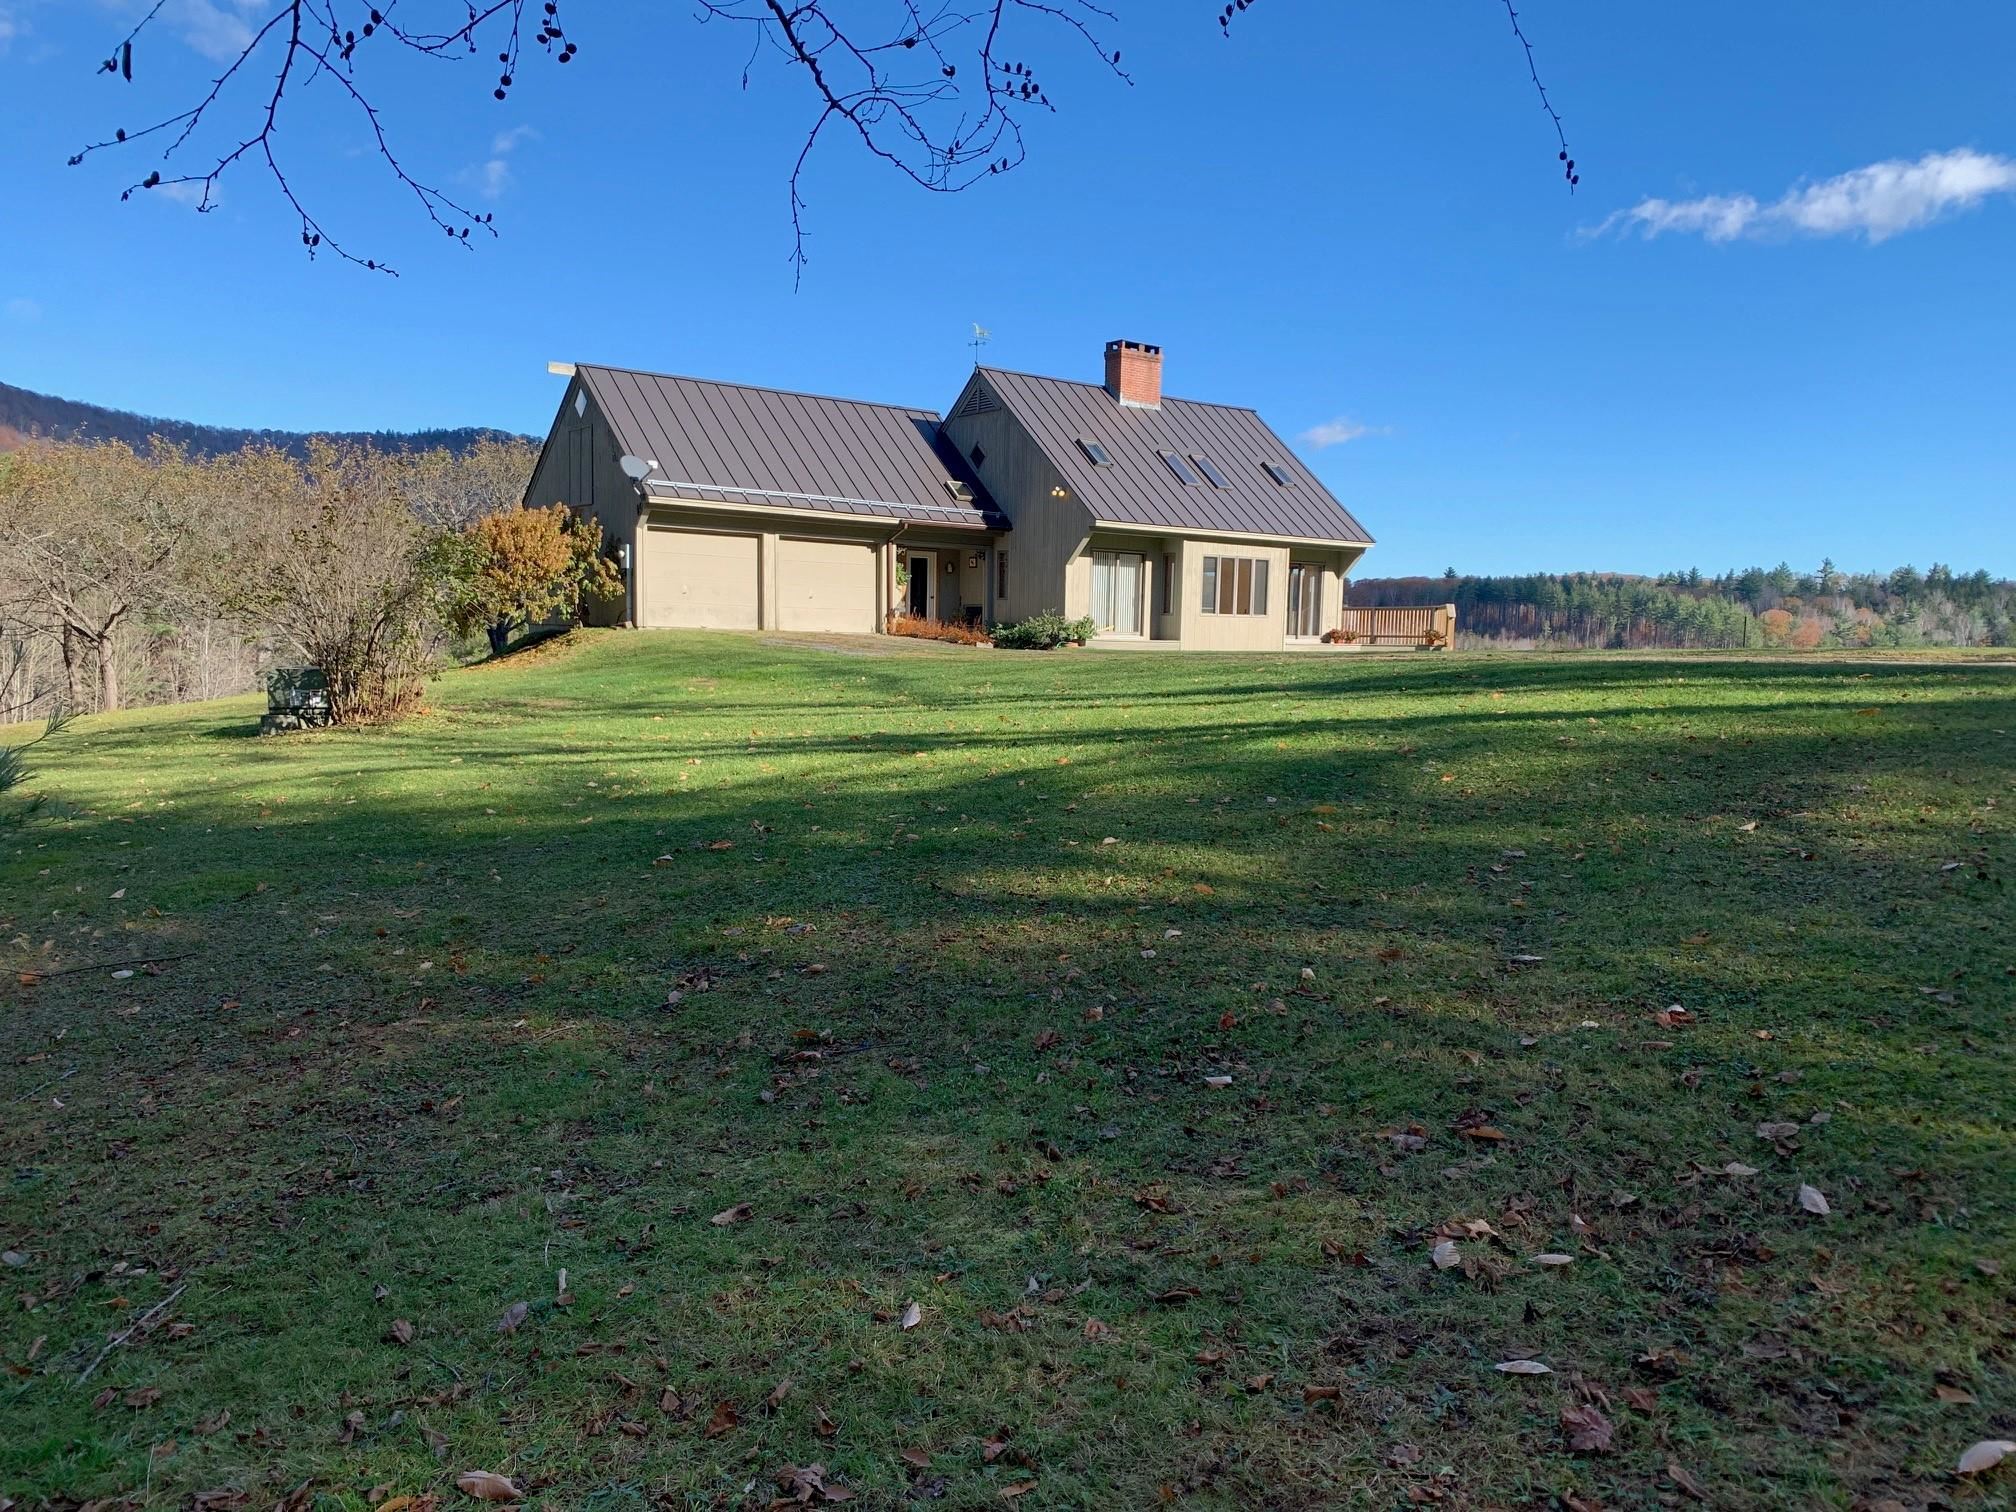 This sun-filled 2-3 bedroom contemporary cape overlooking a spring fed pond sits on 35 acres with stunning views of Mt Ascutney. Open land bordered by stone walls and the north branch of the Black River is perfect for pasture or gardens. The interior is bright with vaulted ceilings in the living area. A kitchen with granite counters, stainless steel appliances and oak flooring opens to a spacious deck. The home is easily maintained with room to expand in the walkout basement or over the 2 car garage. Close proximity to Woodstock, Okemo Mountain and Mt. Ascutney.